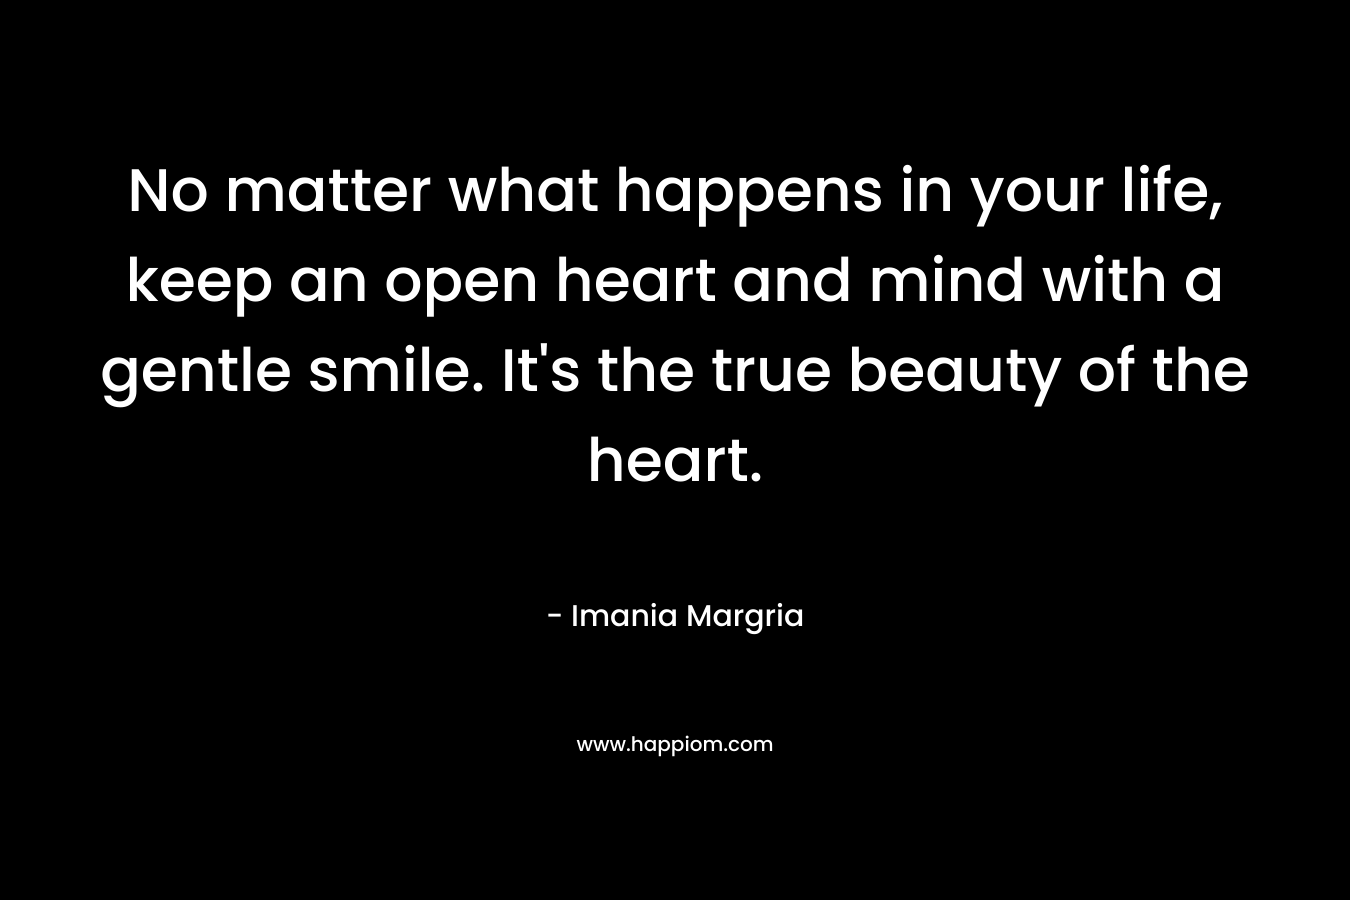 No matter what happens in your life, keep an open heart and mind with a gentle smile. It's the true beauty of the heart.